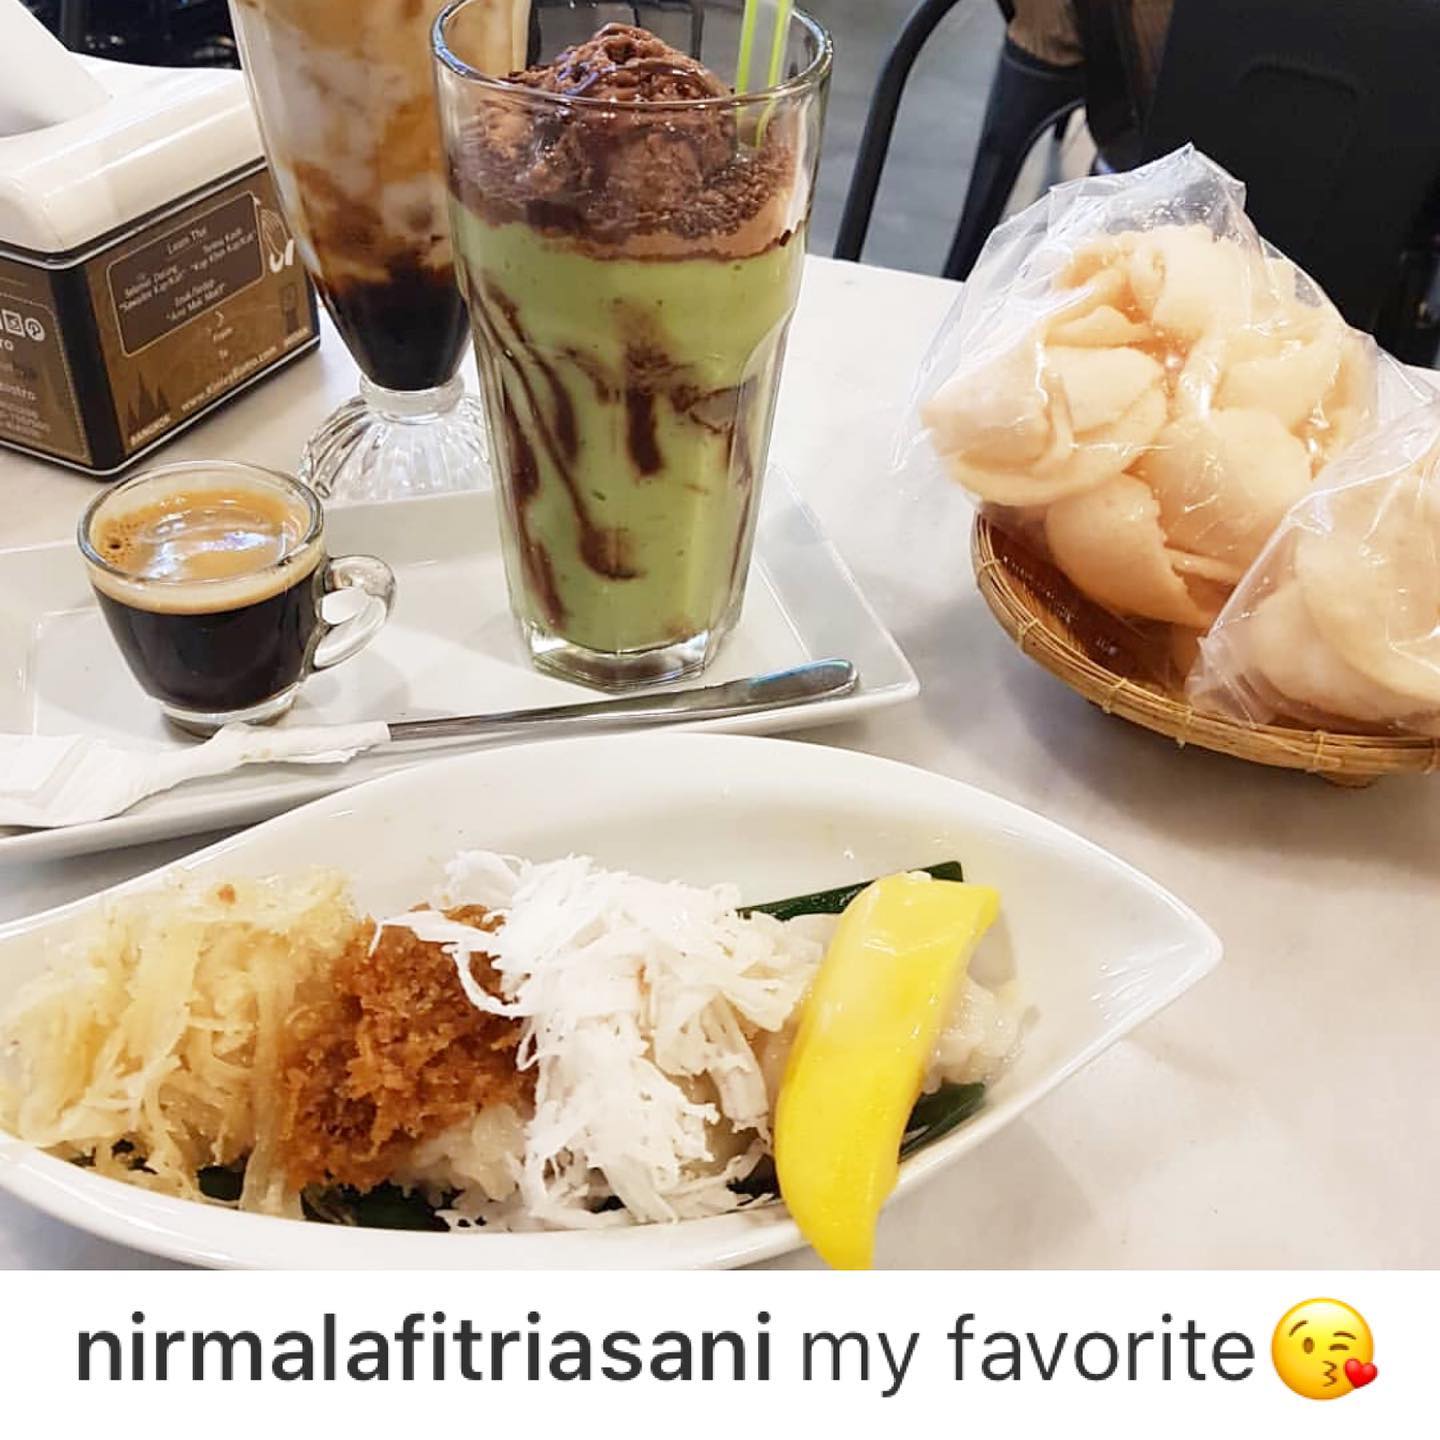 Favorite desserts and drinks at Kinley Thai Bistro
Pulut 4 Rasa Thai, Avocado Espresso and Ice Durian Sago
Which is your favorite?
Thank you for sharing your kindest review @nirmalafitriasani 
Read more